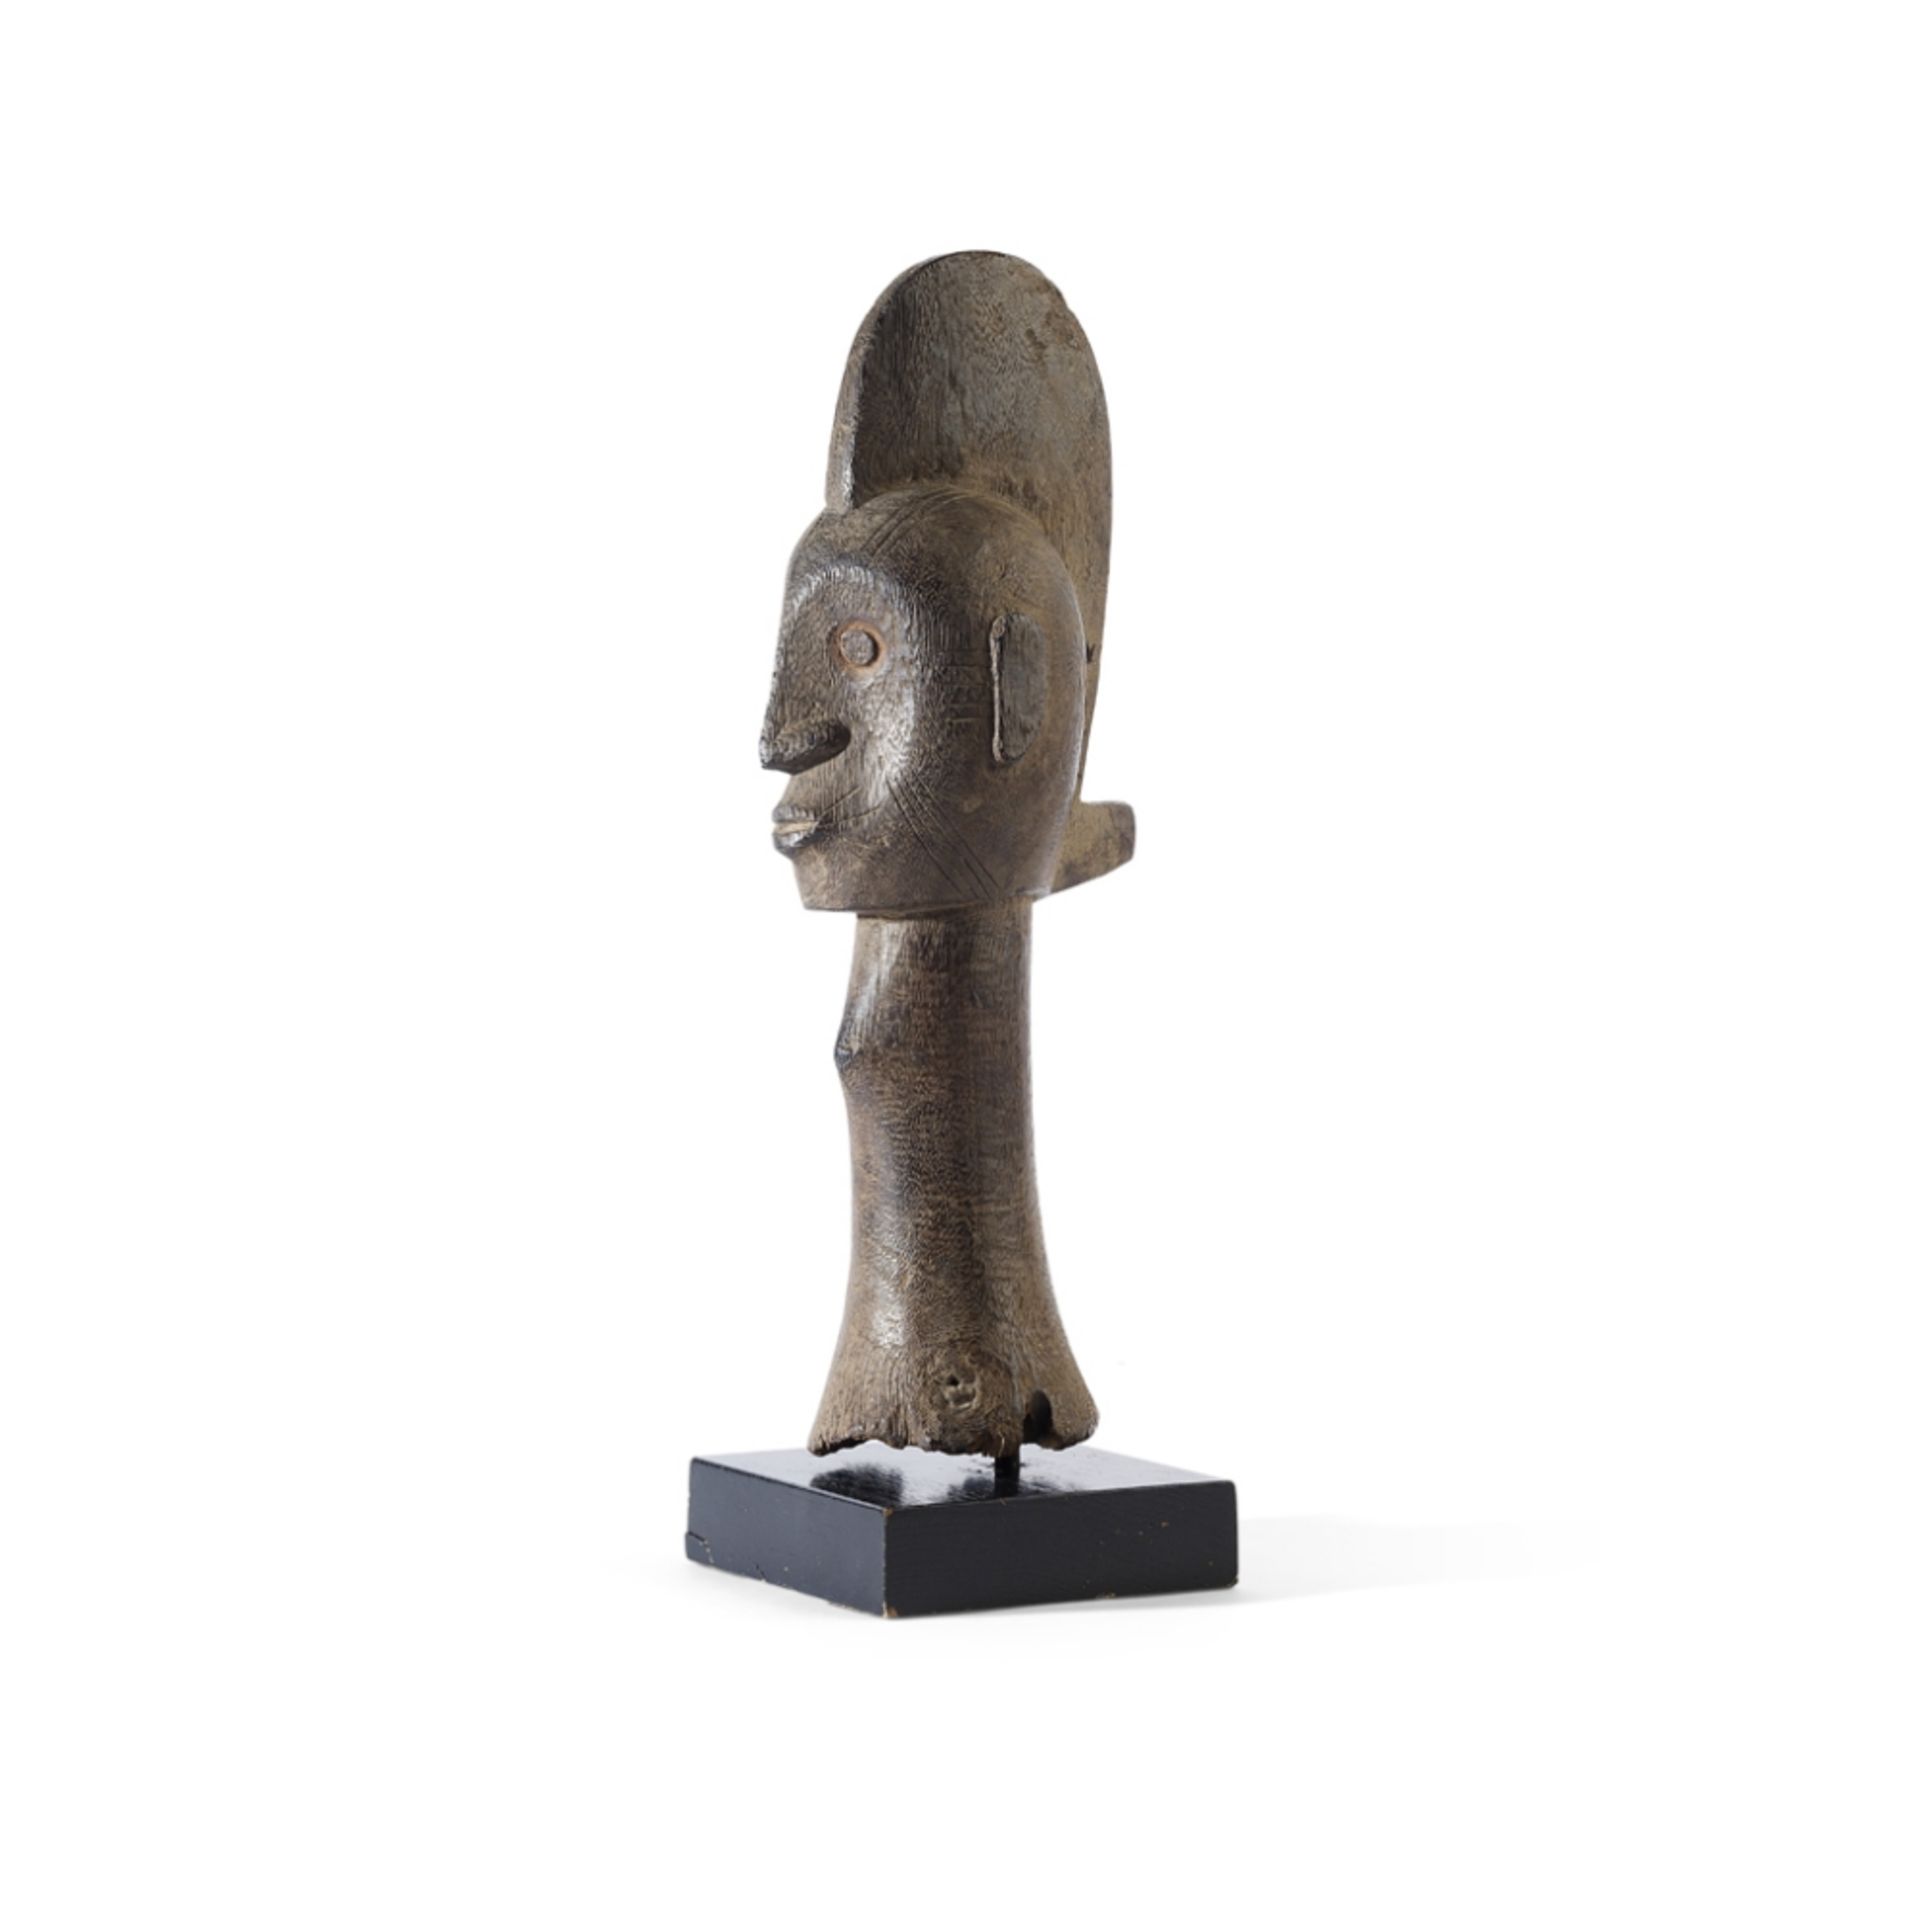 IGALA HEAD CRESTNIGERIA carved wood, a tall neck leading to the head with pursed lips, slender - Image 2 of 2